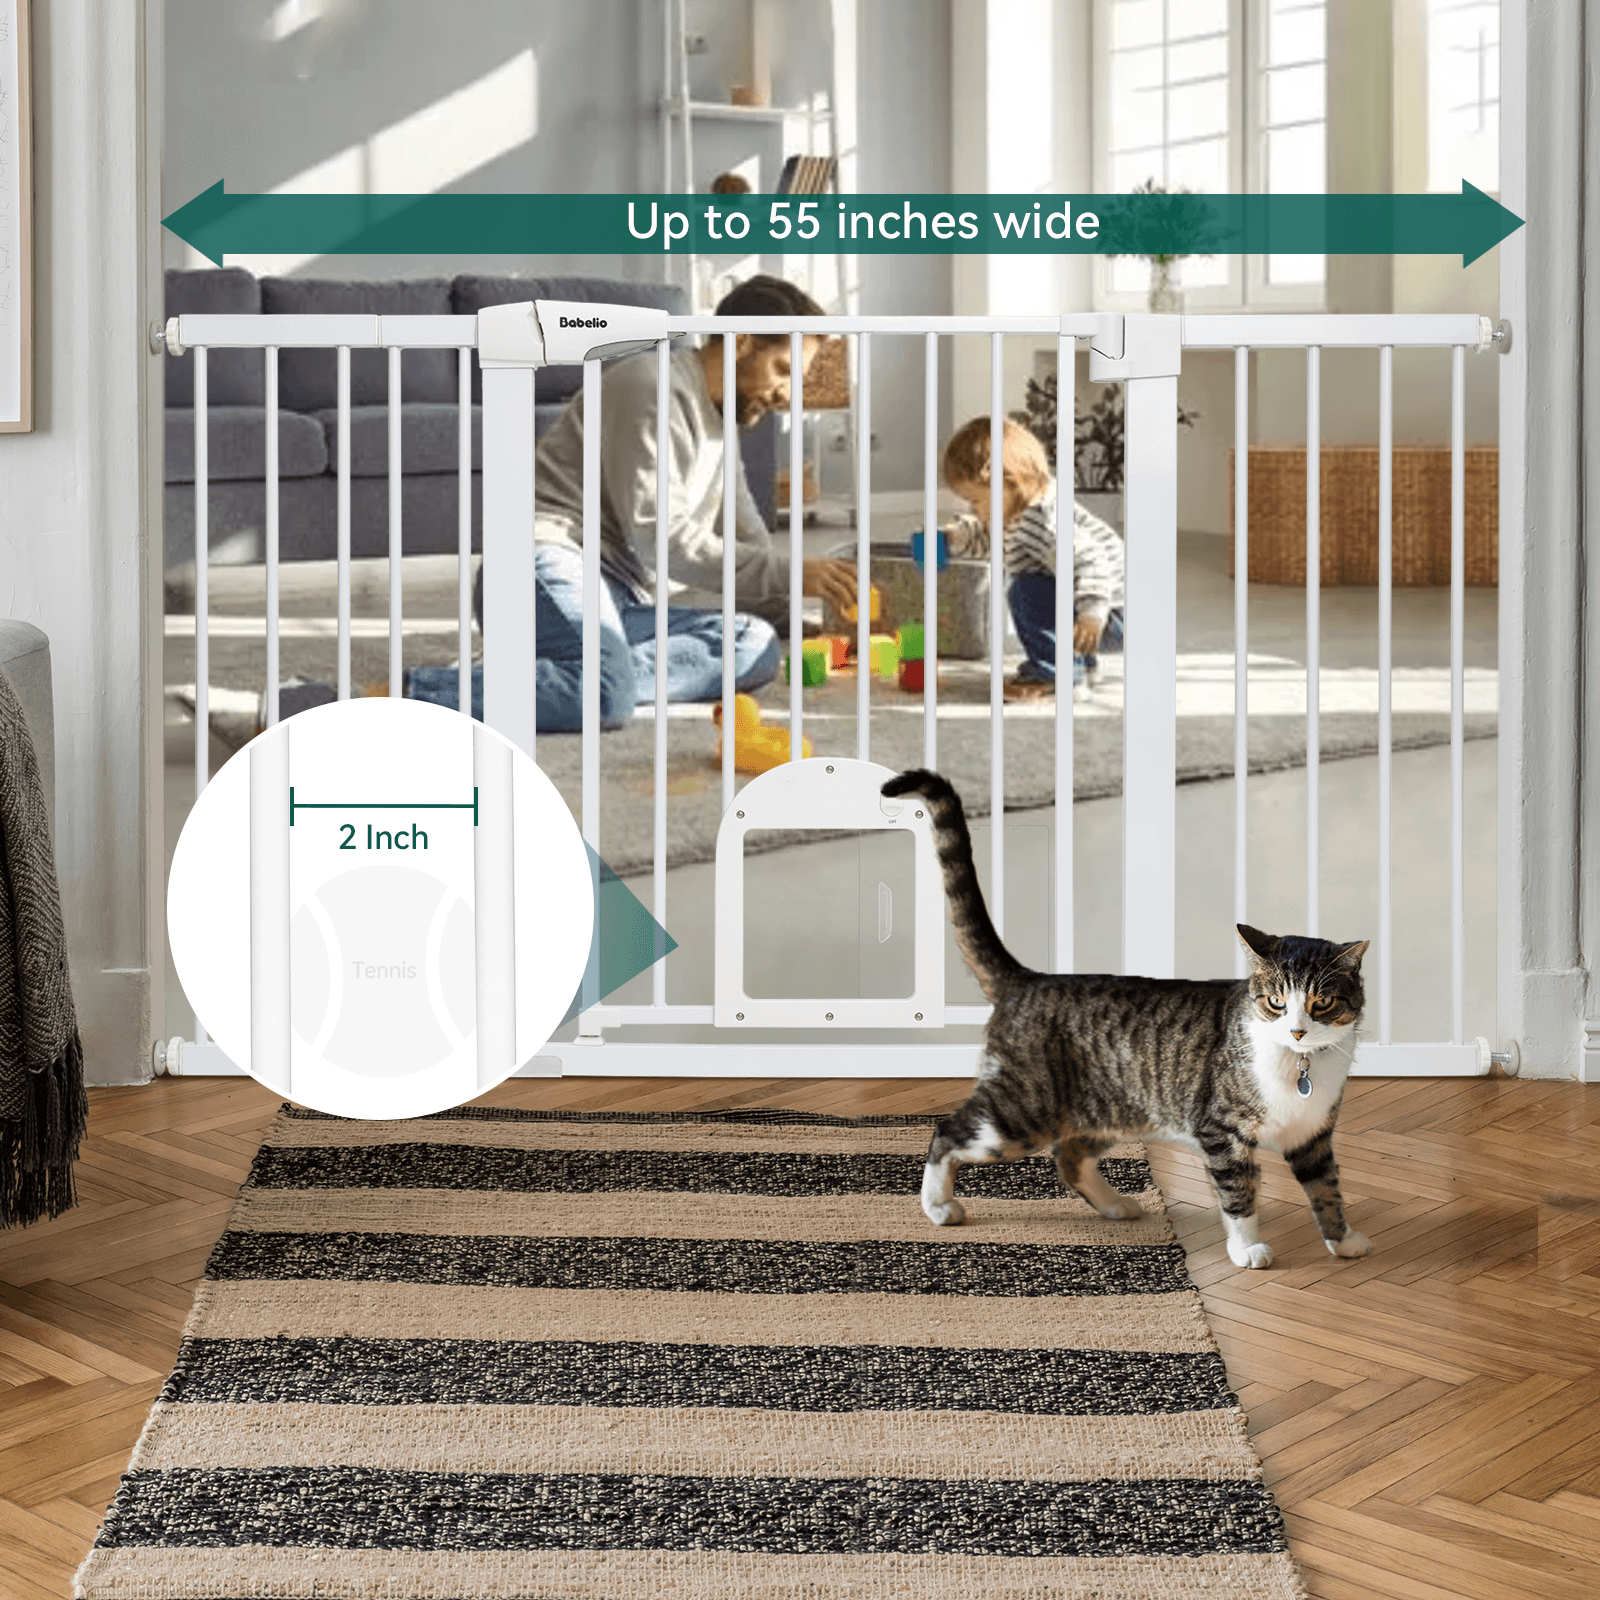 Babelio 31.5-55" Baby and Pet Gate with Cat Door, Auto-Close, Pressure-Mounted for Stairs and Doorways